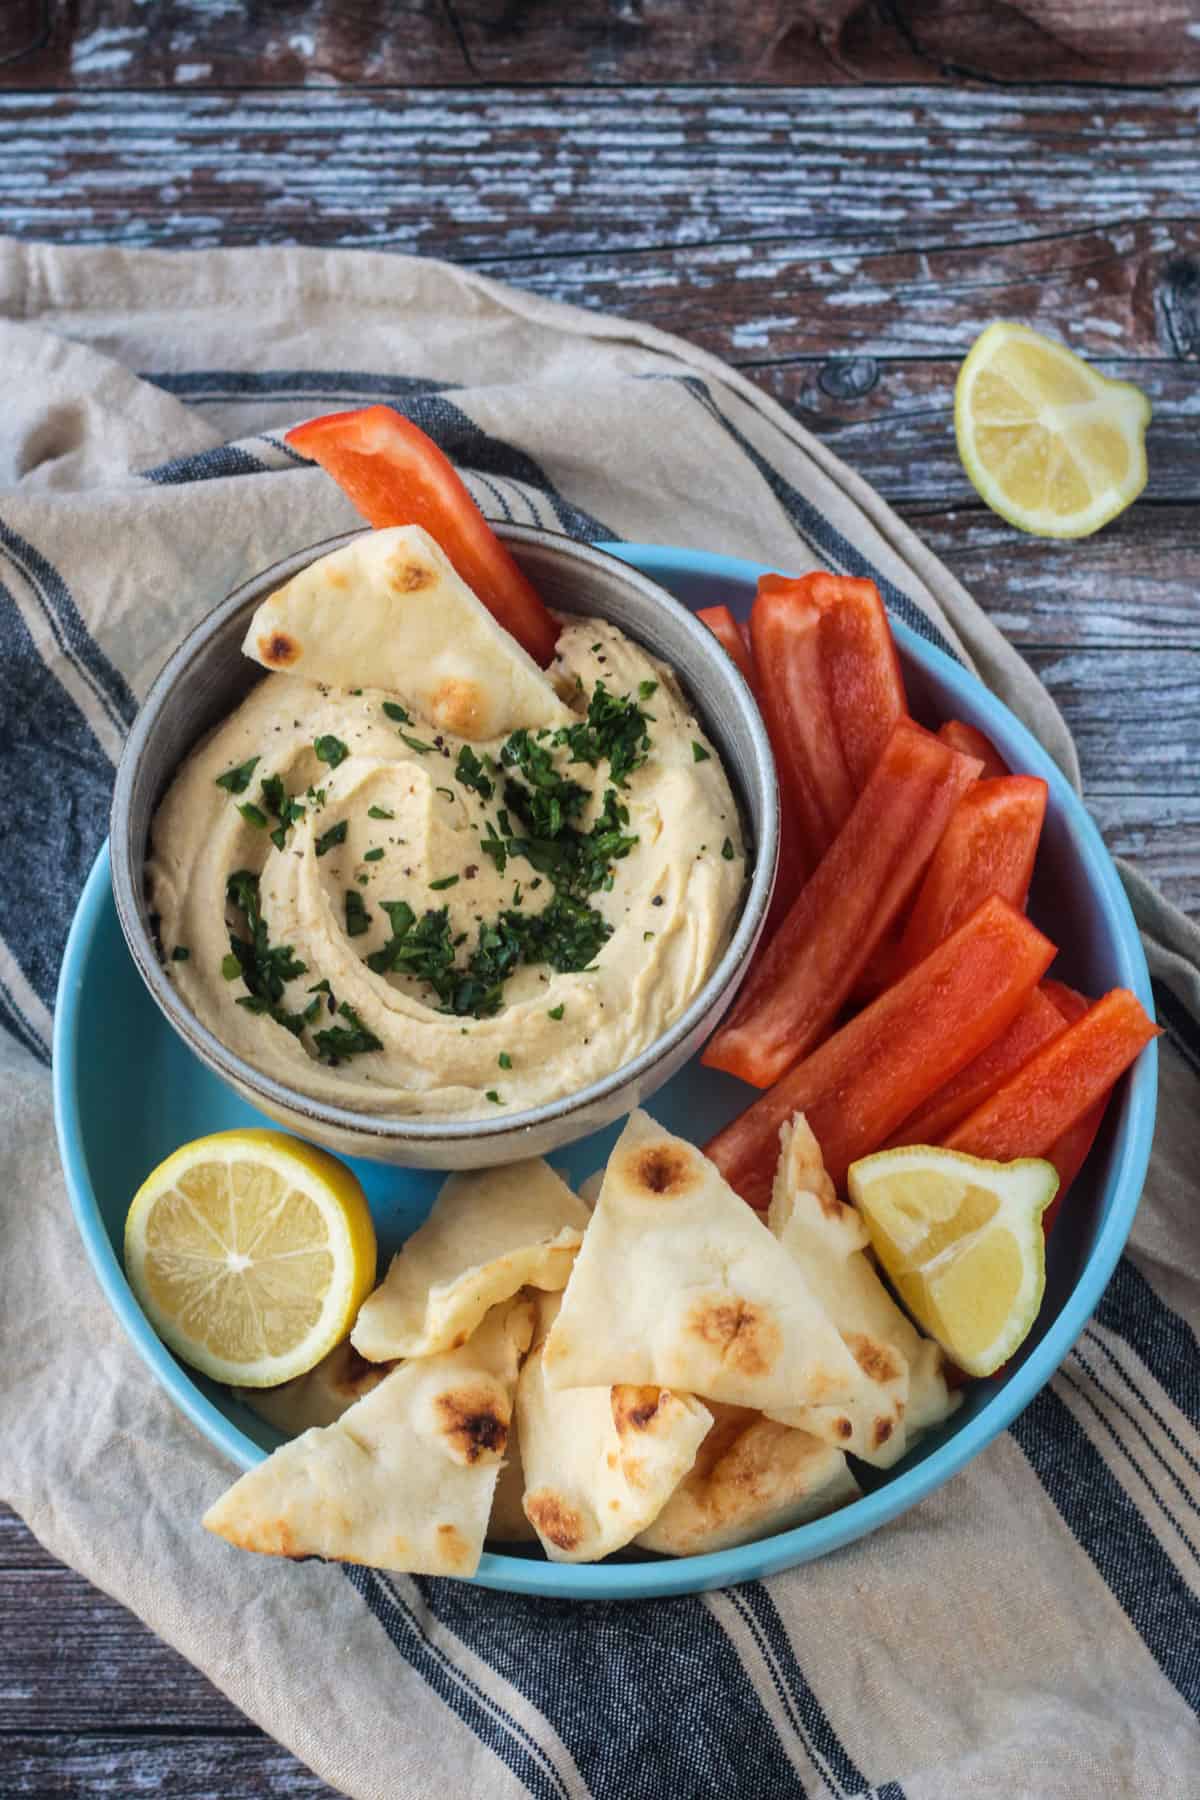 Bowl of oil free hummus next to pita triangles and red bell pepper strips.